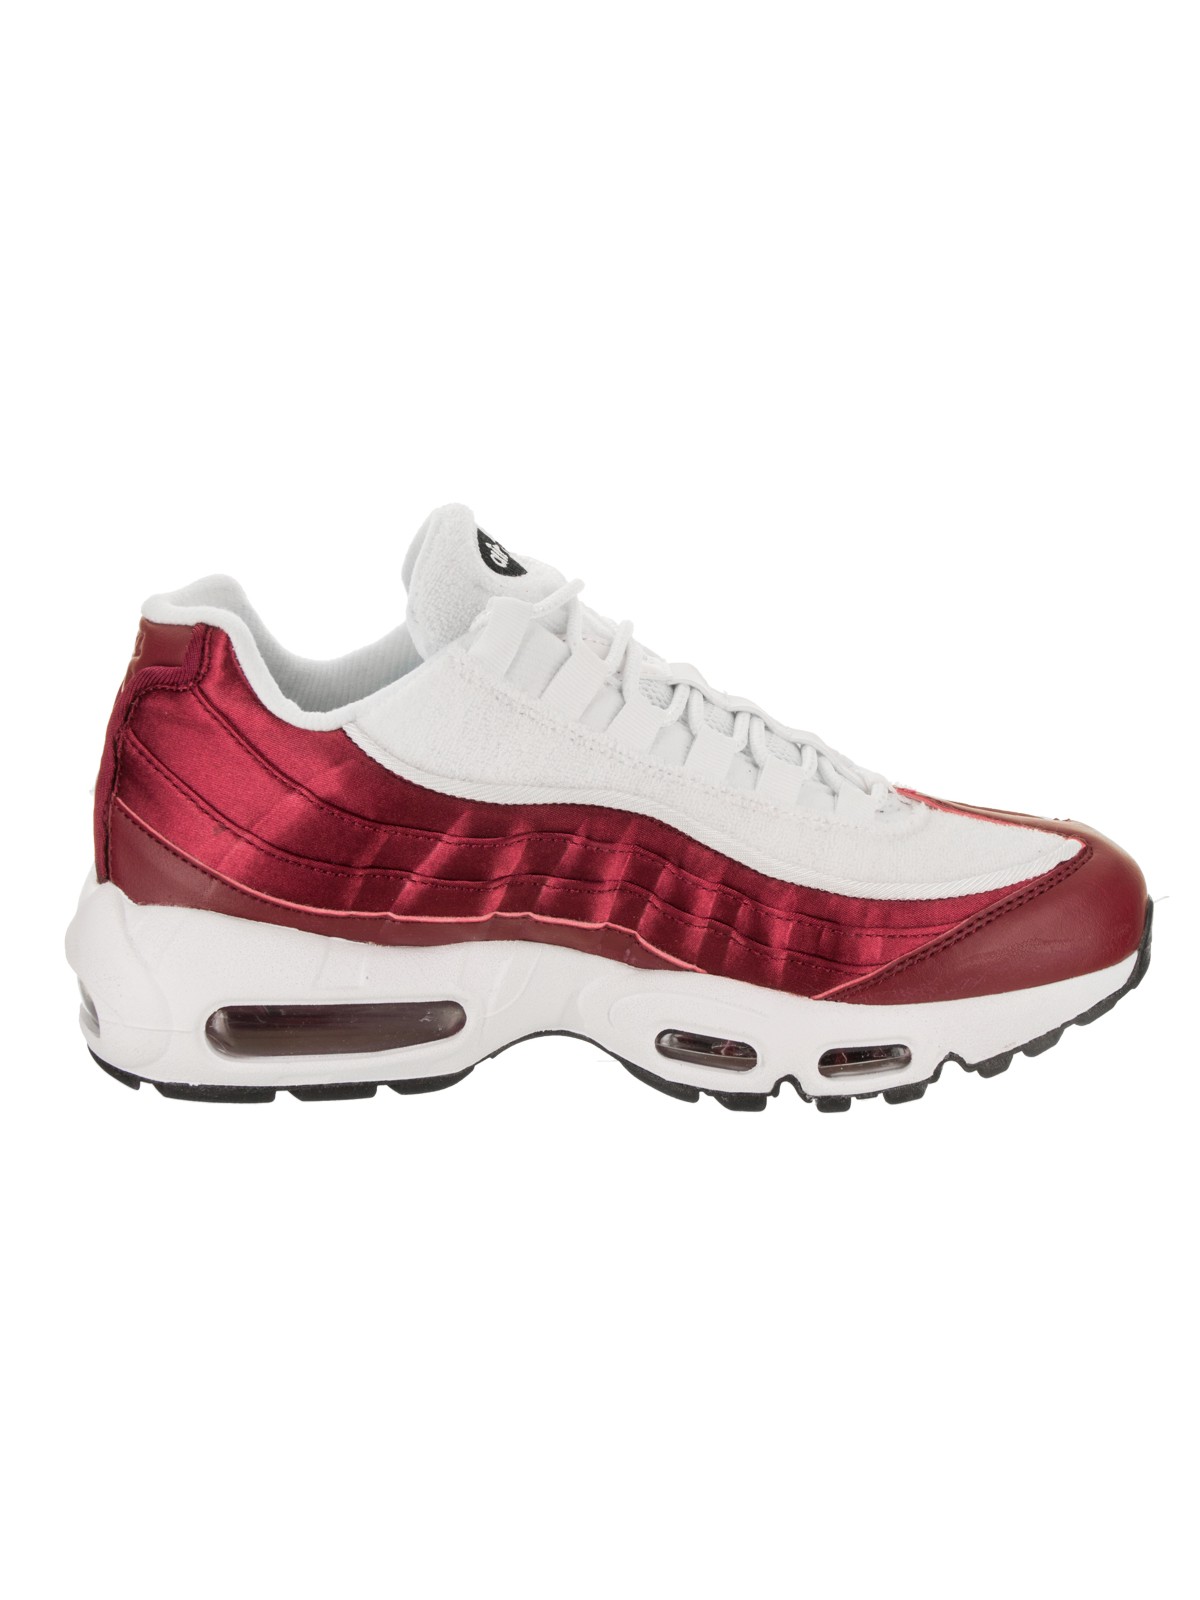 Nike Women's Air Max 95 LX Casual Shoe - image 2 of 5